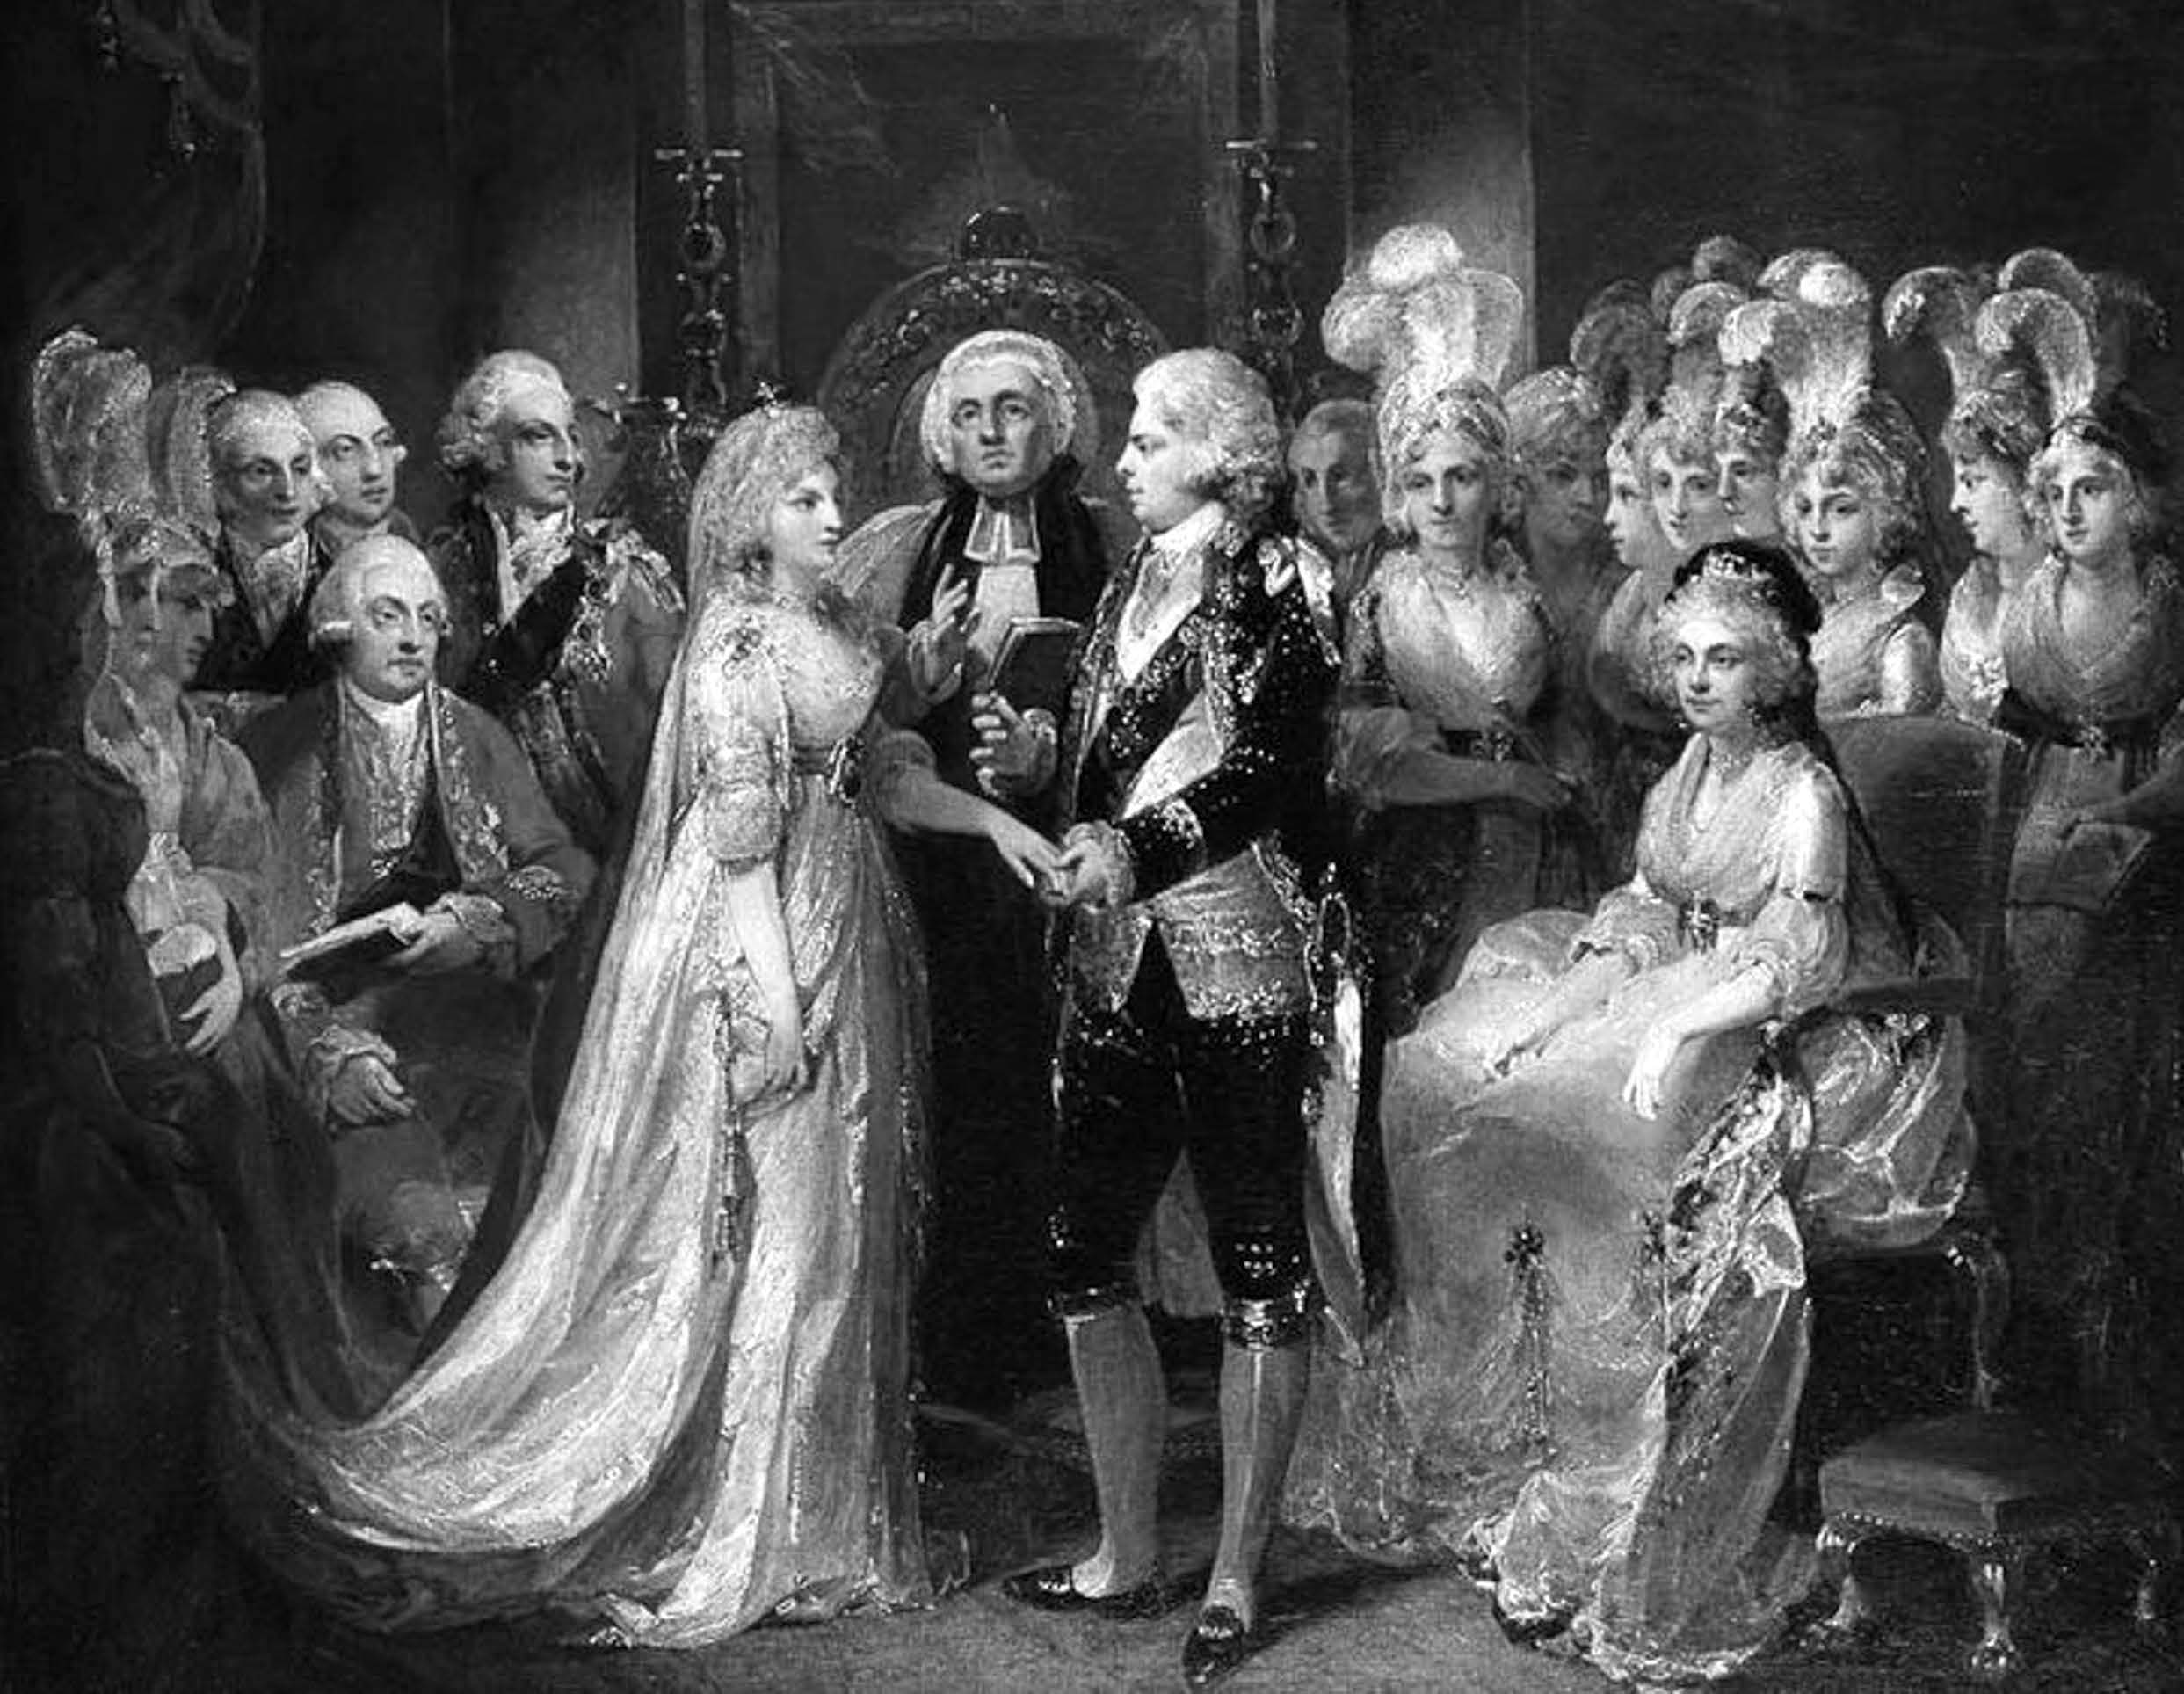 The Wedding of George, Prince of Wales, and Princess Caroline of Brunswick Officiated on 8 April 1795 in the Chapel Royal of St. James's Palace, London, by Gainsborough Dupont. The Picture Art Collection / Alamy Stock Photo.